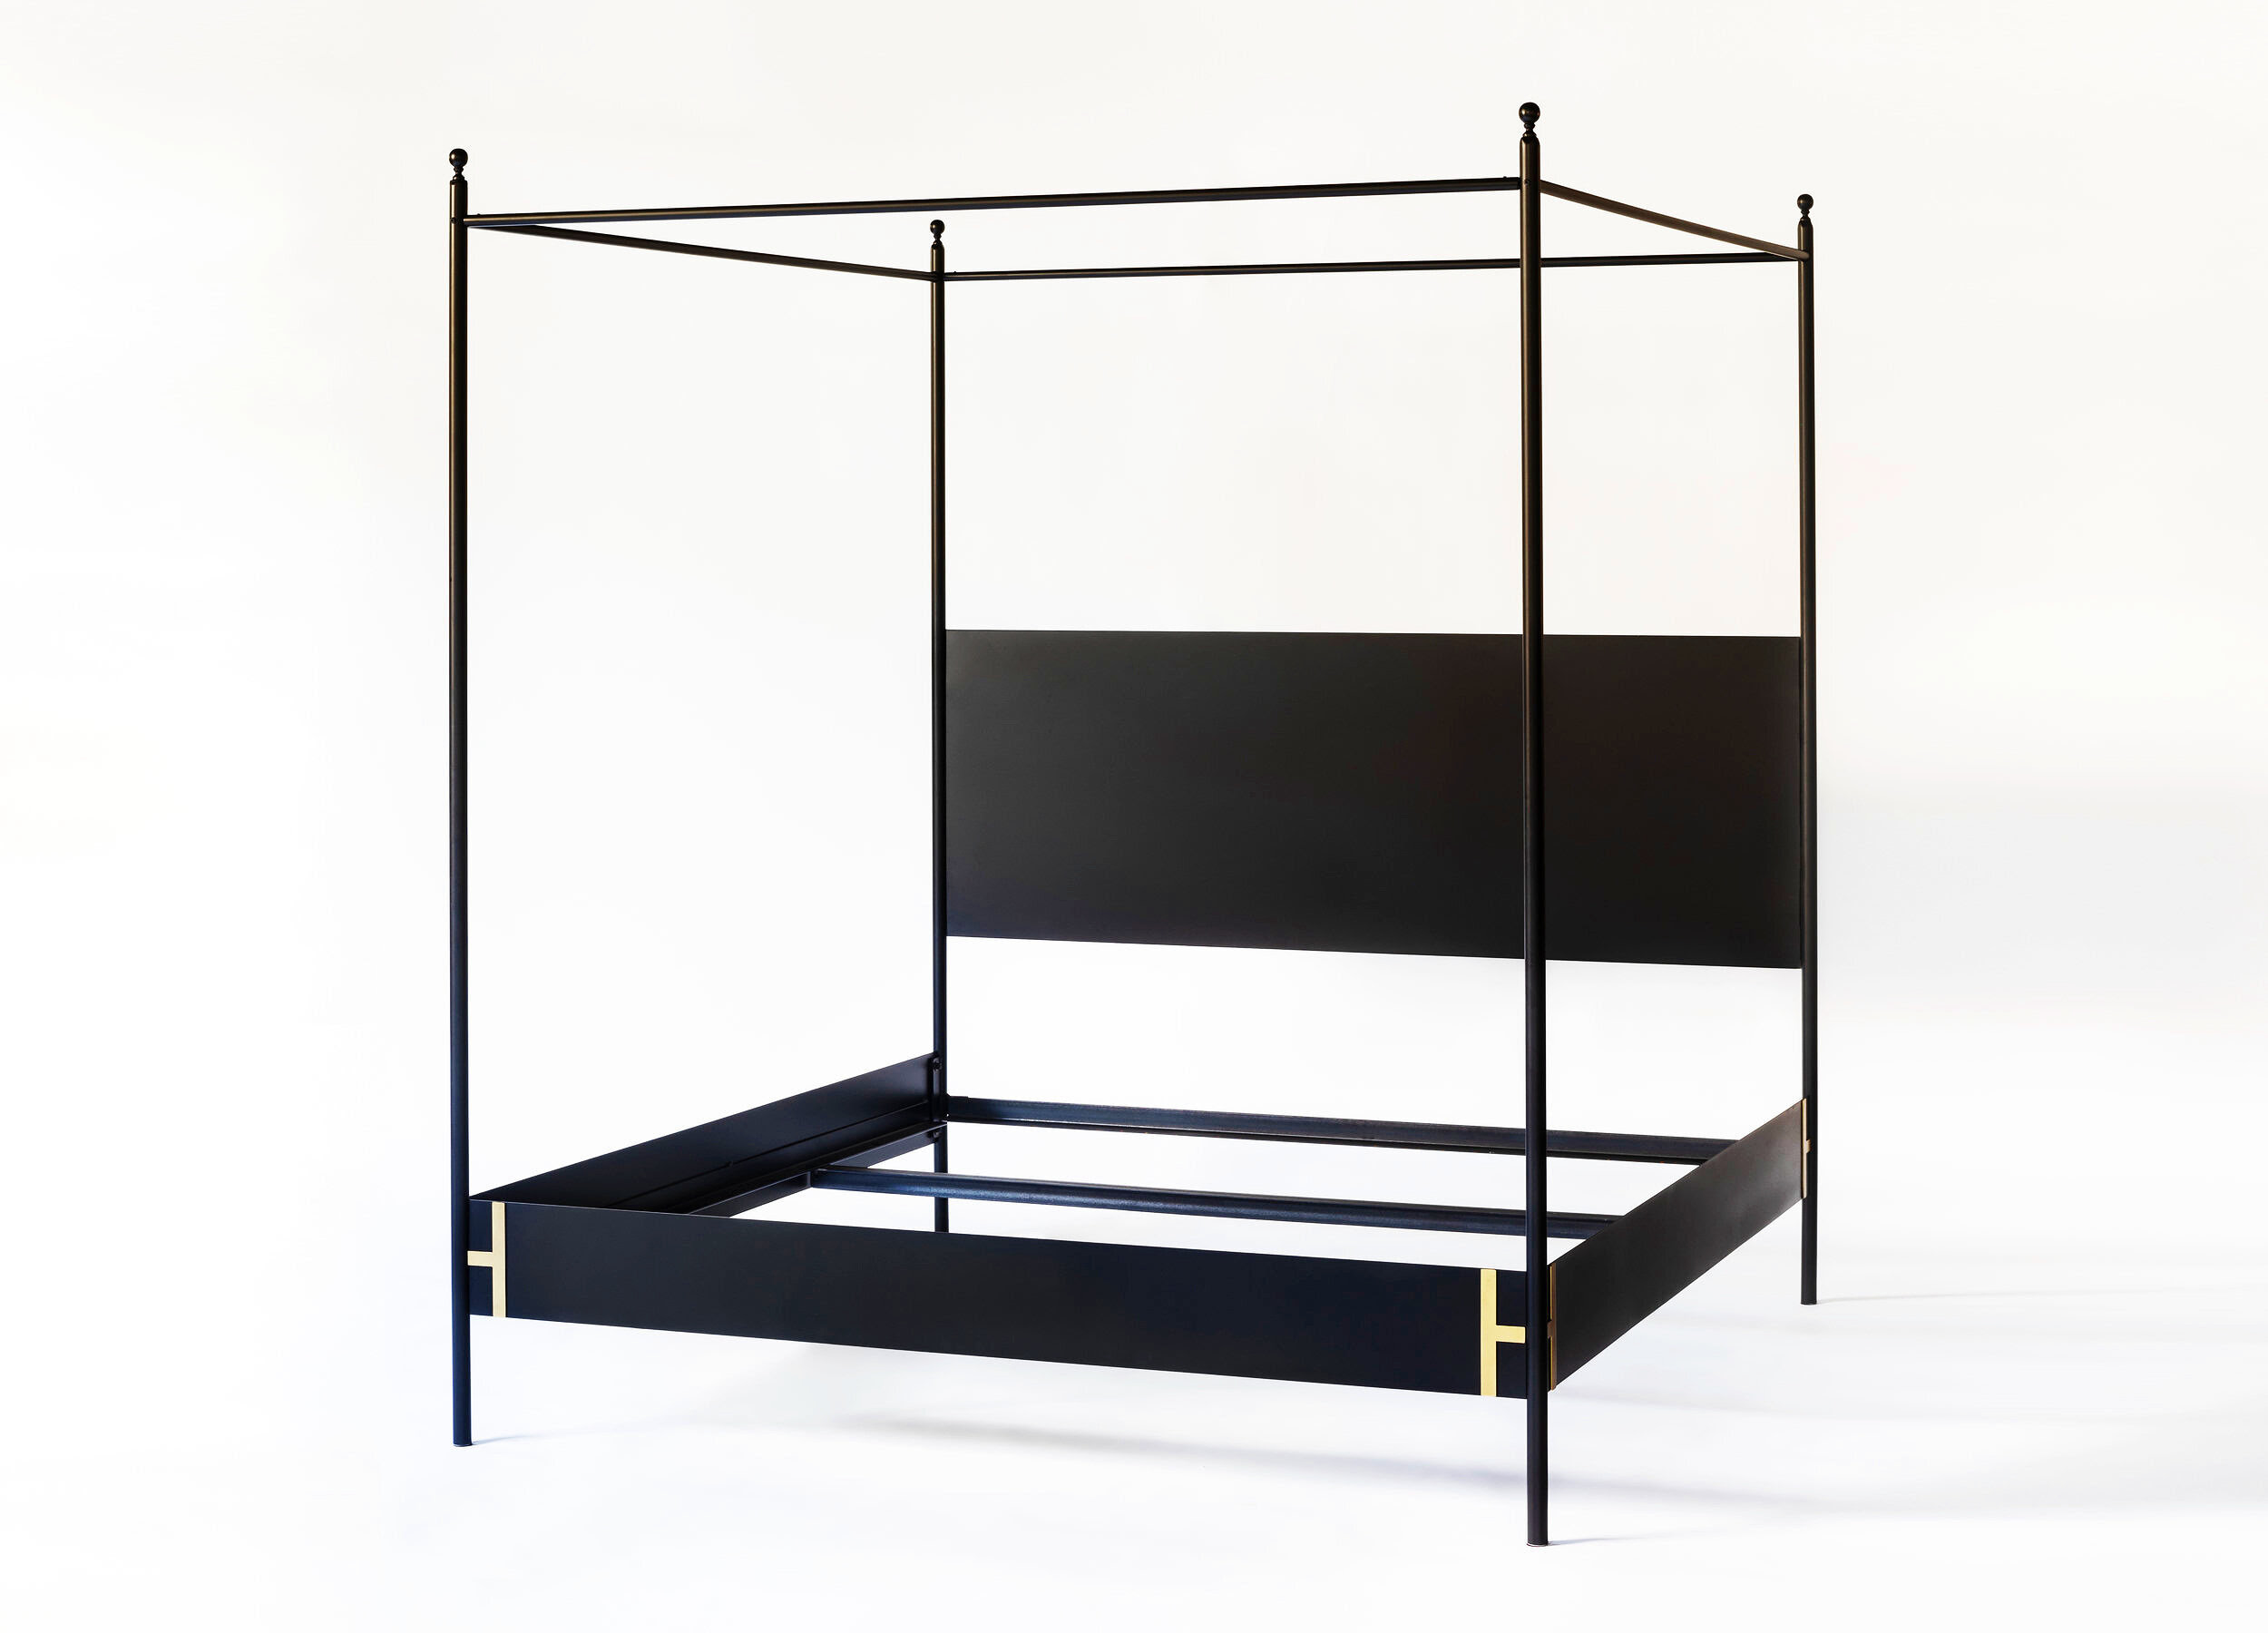 Canopy bed frames included in this wiki include the dhp metal carriage, meridian furniture porter, zinus suzanne, south shore sweedi, furniture of america eckel, zinus patricia, zinus kenn, novogratz camilla. Josephine Black Metal Four Poster Canopy Bed Doorman